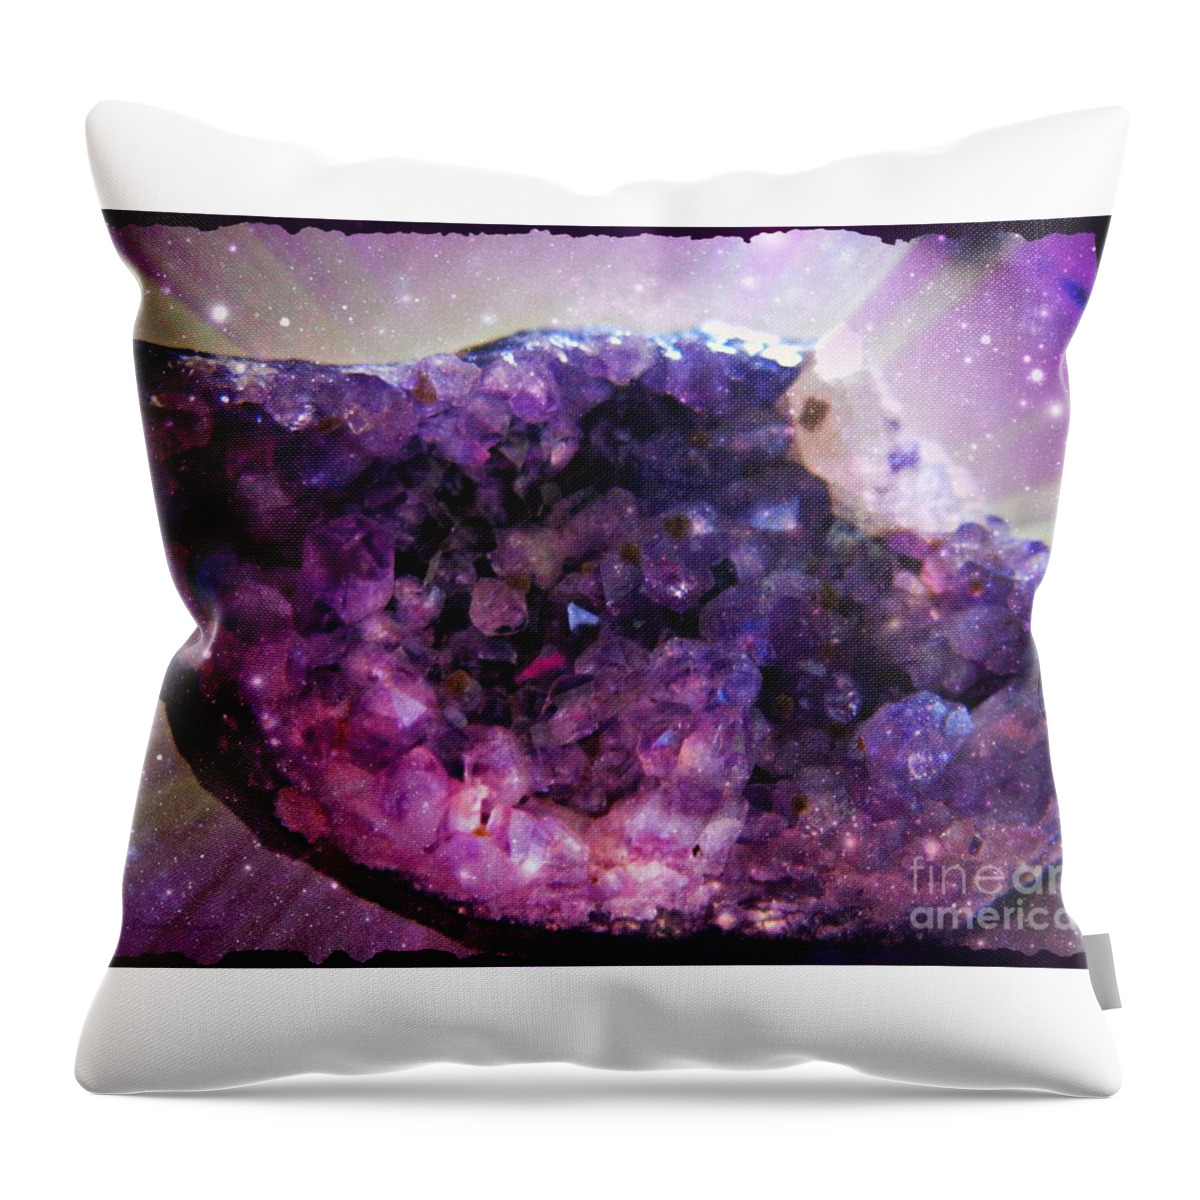 Amethyst Cluster Throw Pillow featuring the mixed media Amethyst by Leanne Seymour